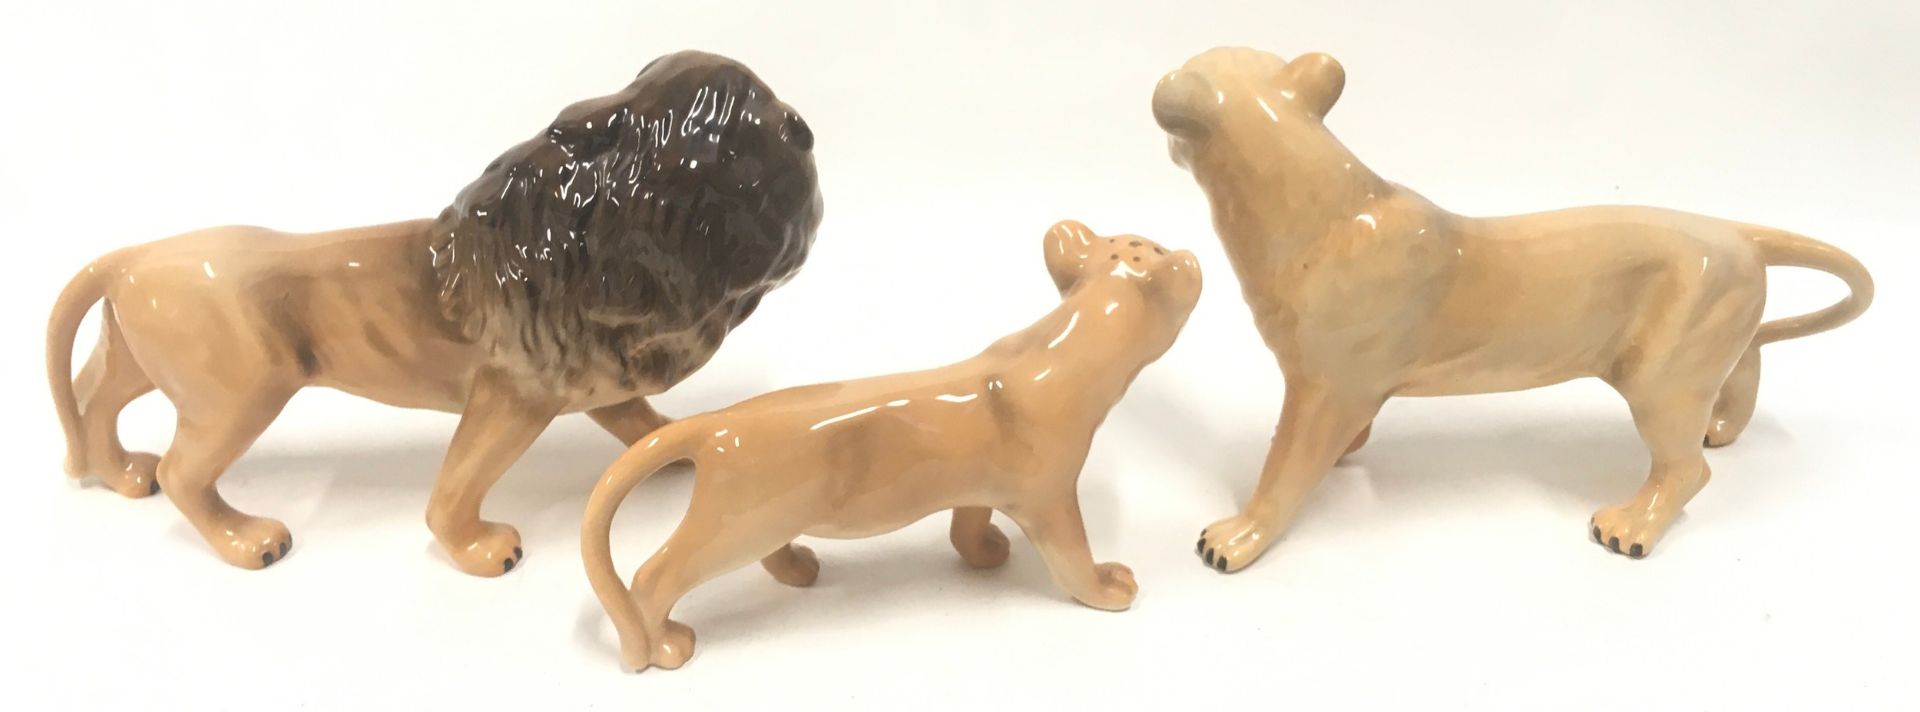 Beswick family of three lions the largest measuring 14x23x8cm. Overall in very good condition, no - Image 3 of 5